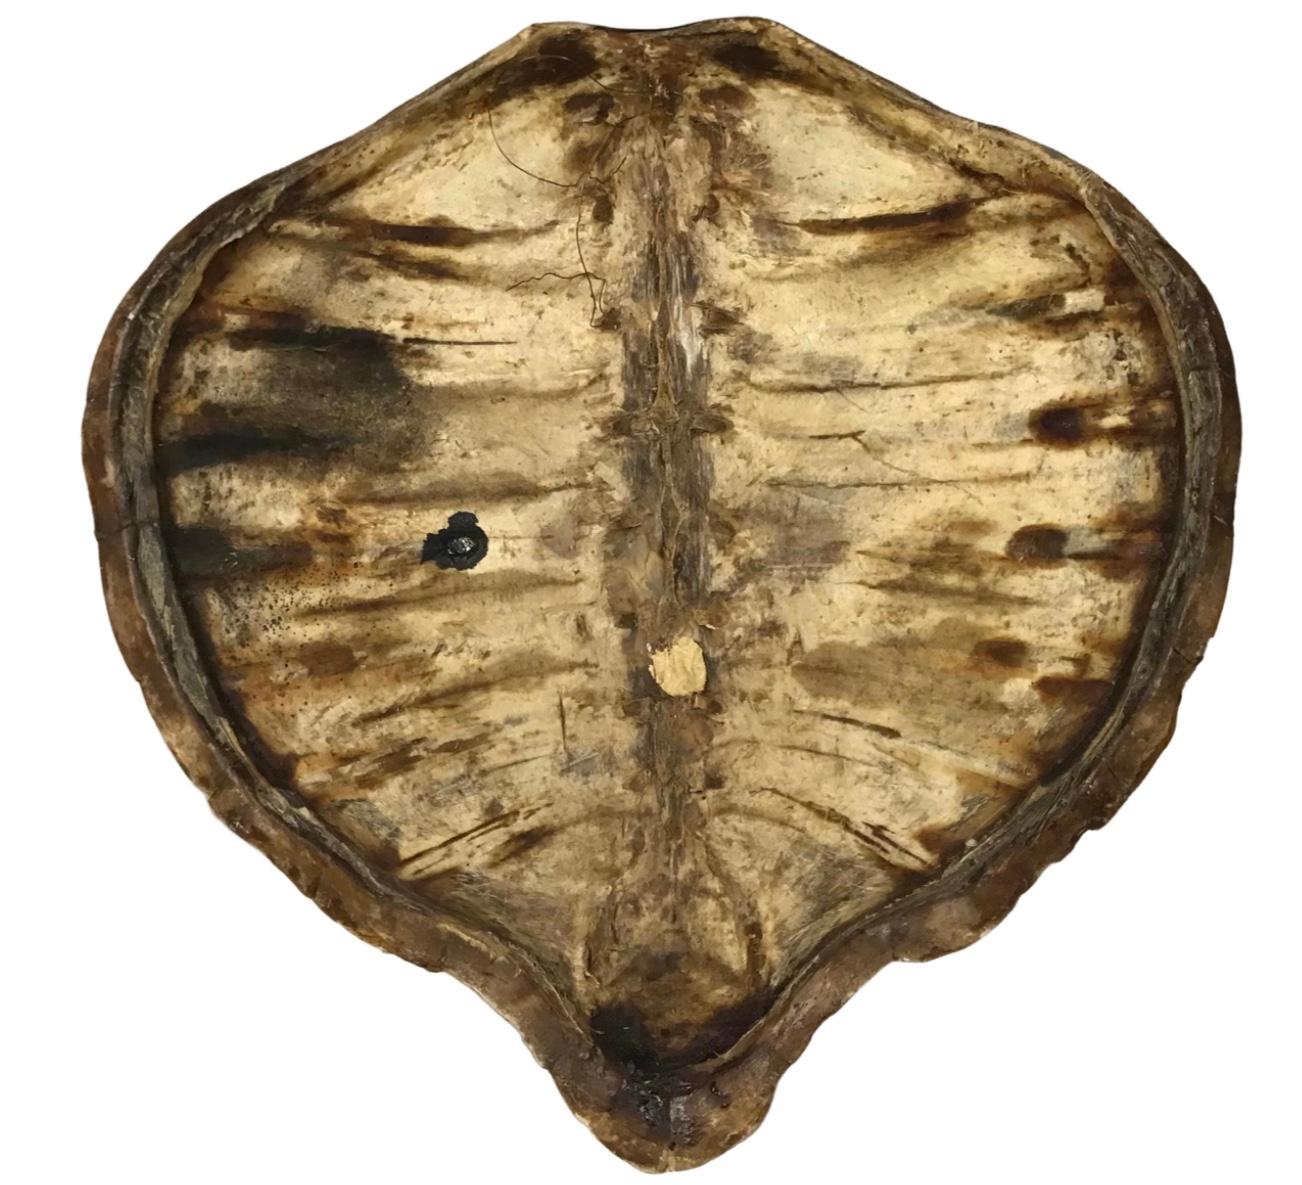 A large antique 19th-century giant sea turtle carapace (shell) specimen
Authentic antique turtle shell. Elegant and mighty. A wonderfully naturalistic design tortoise shell.